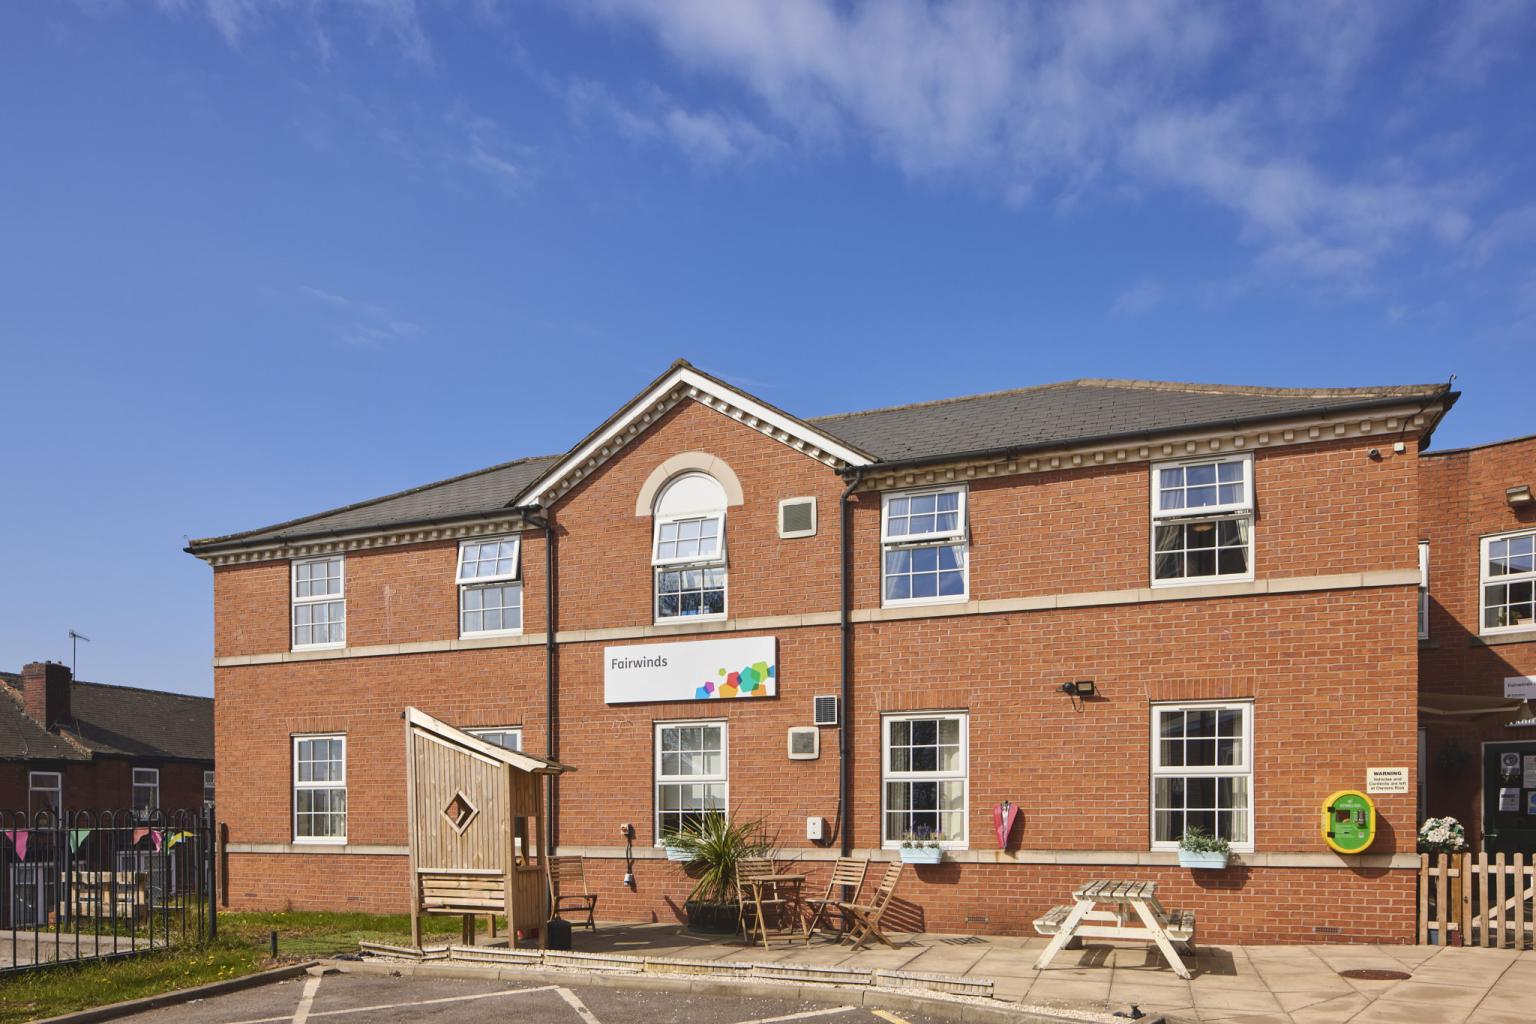 Fairwinds care home in Rotherham